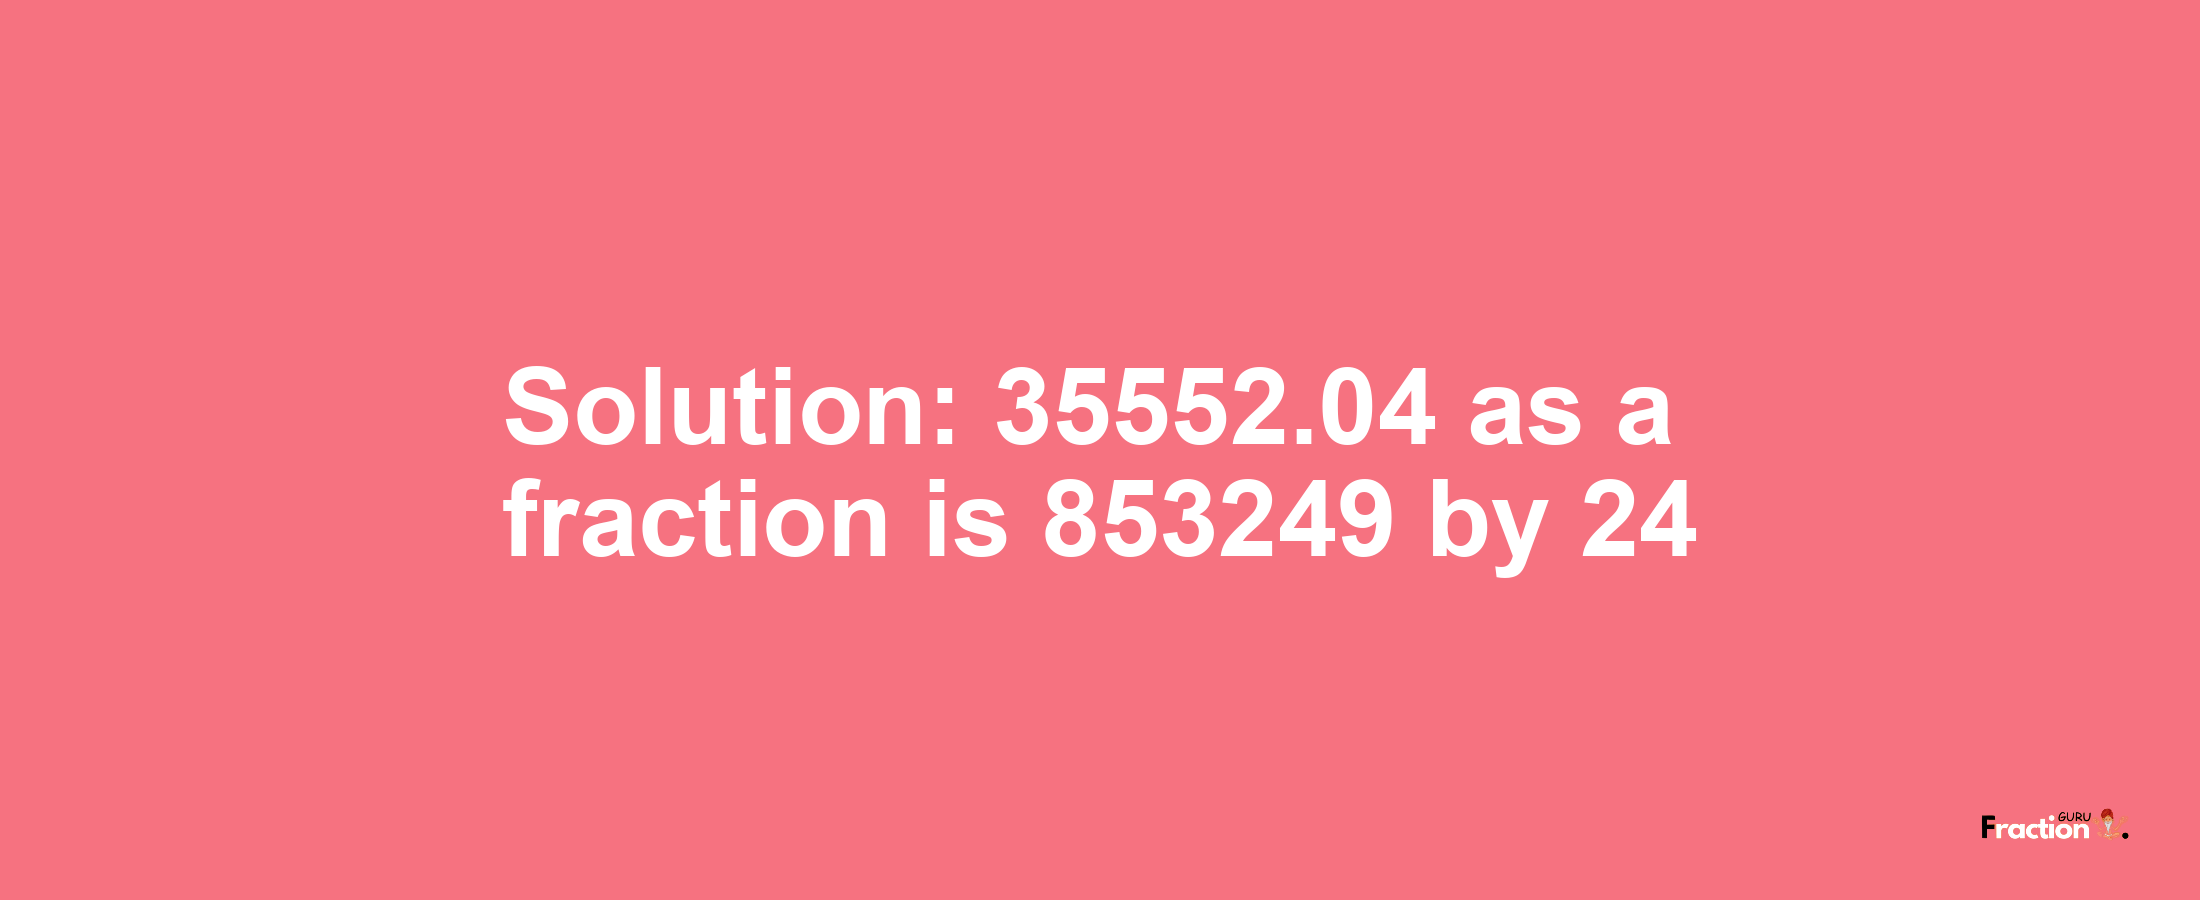 Solution:35552.04 as a fraction is 853249/24